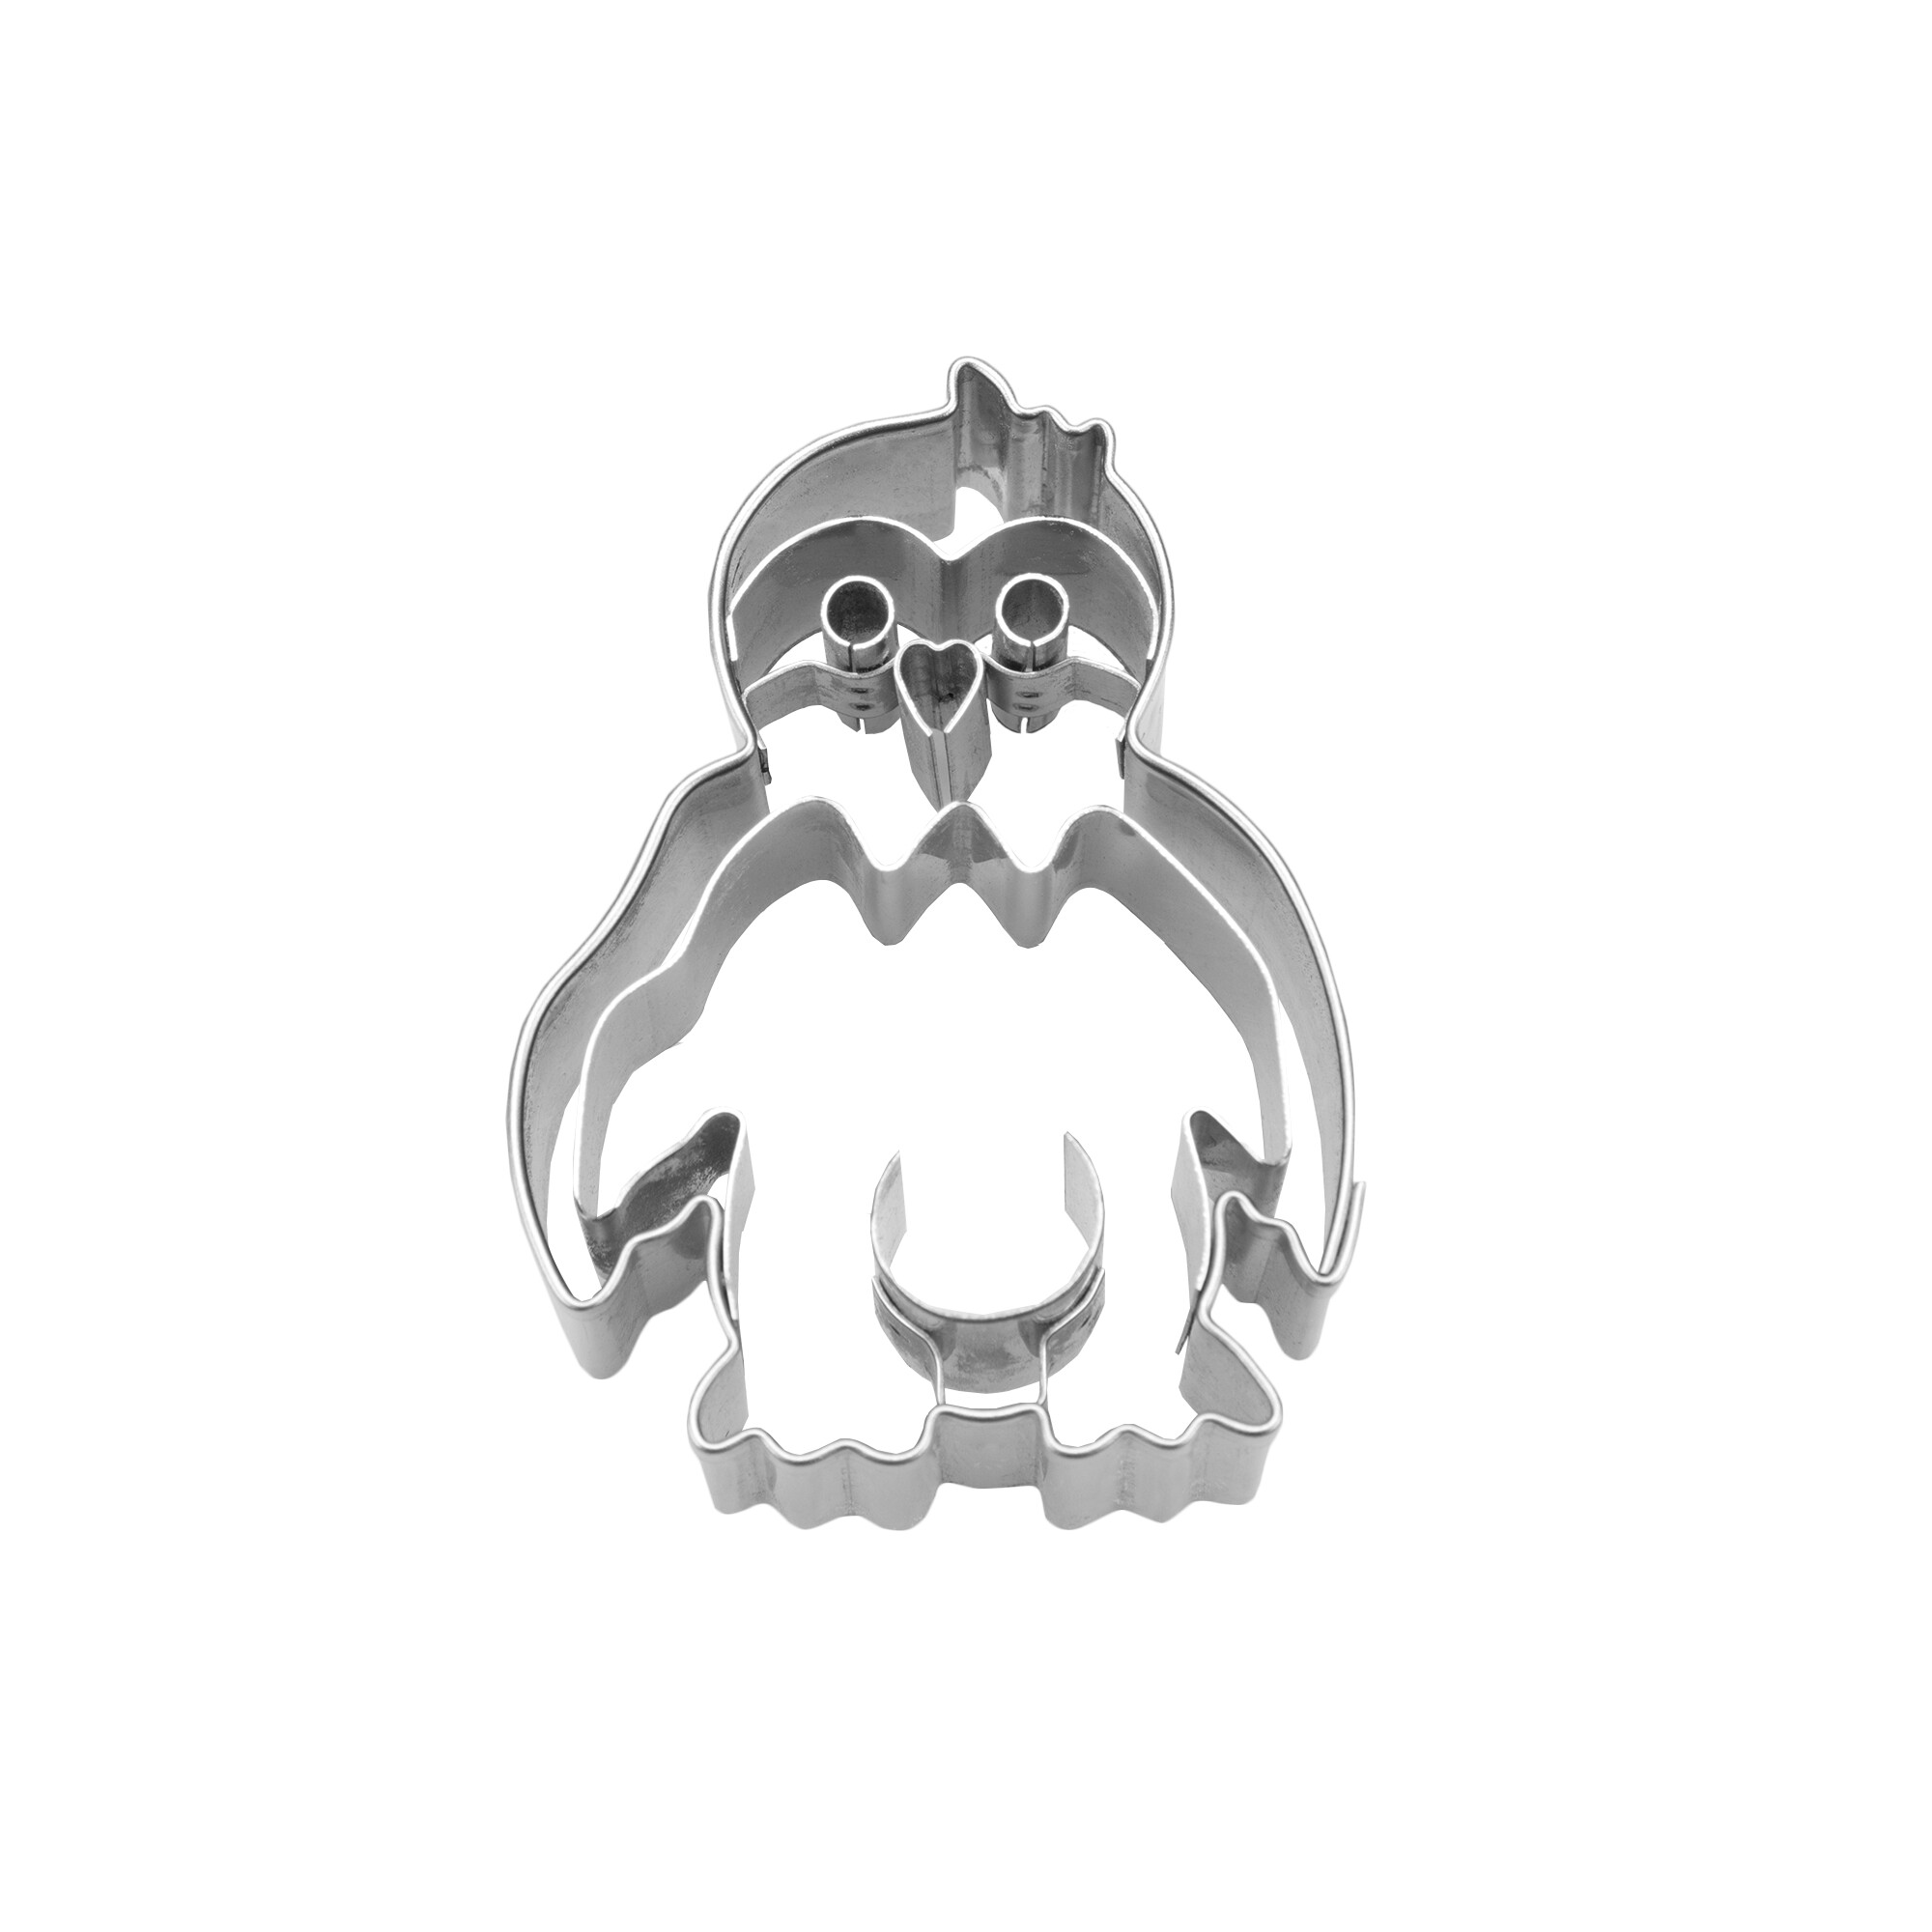 Cookie cutter with stamp – Penguin